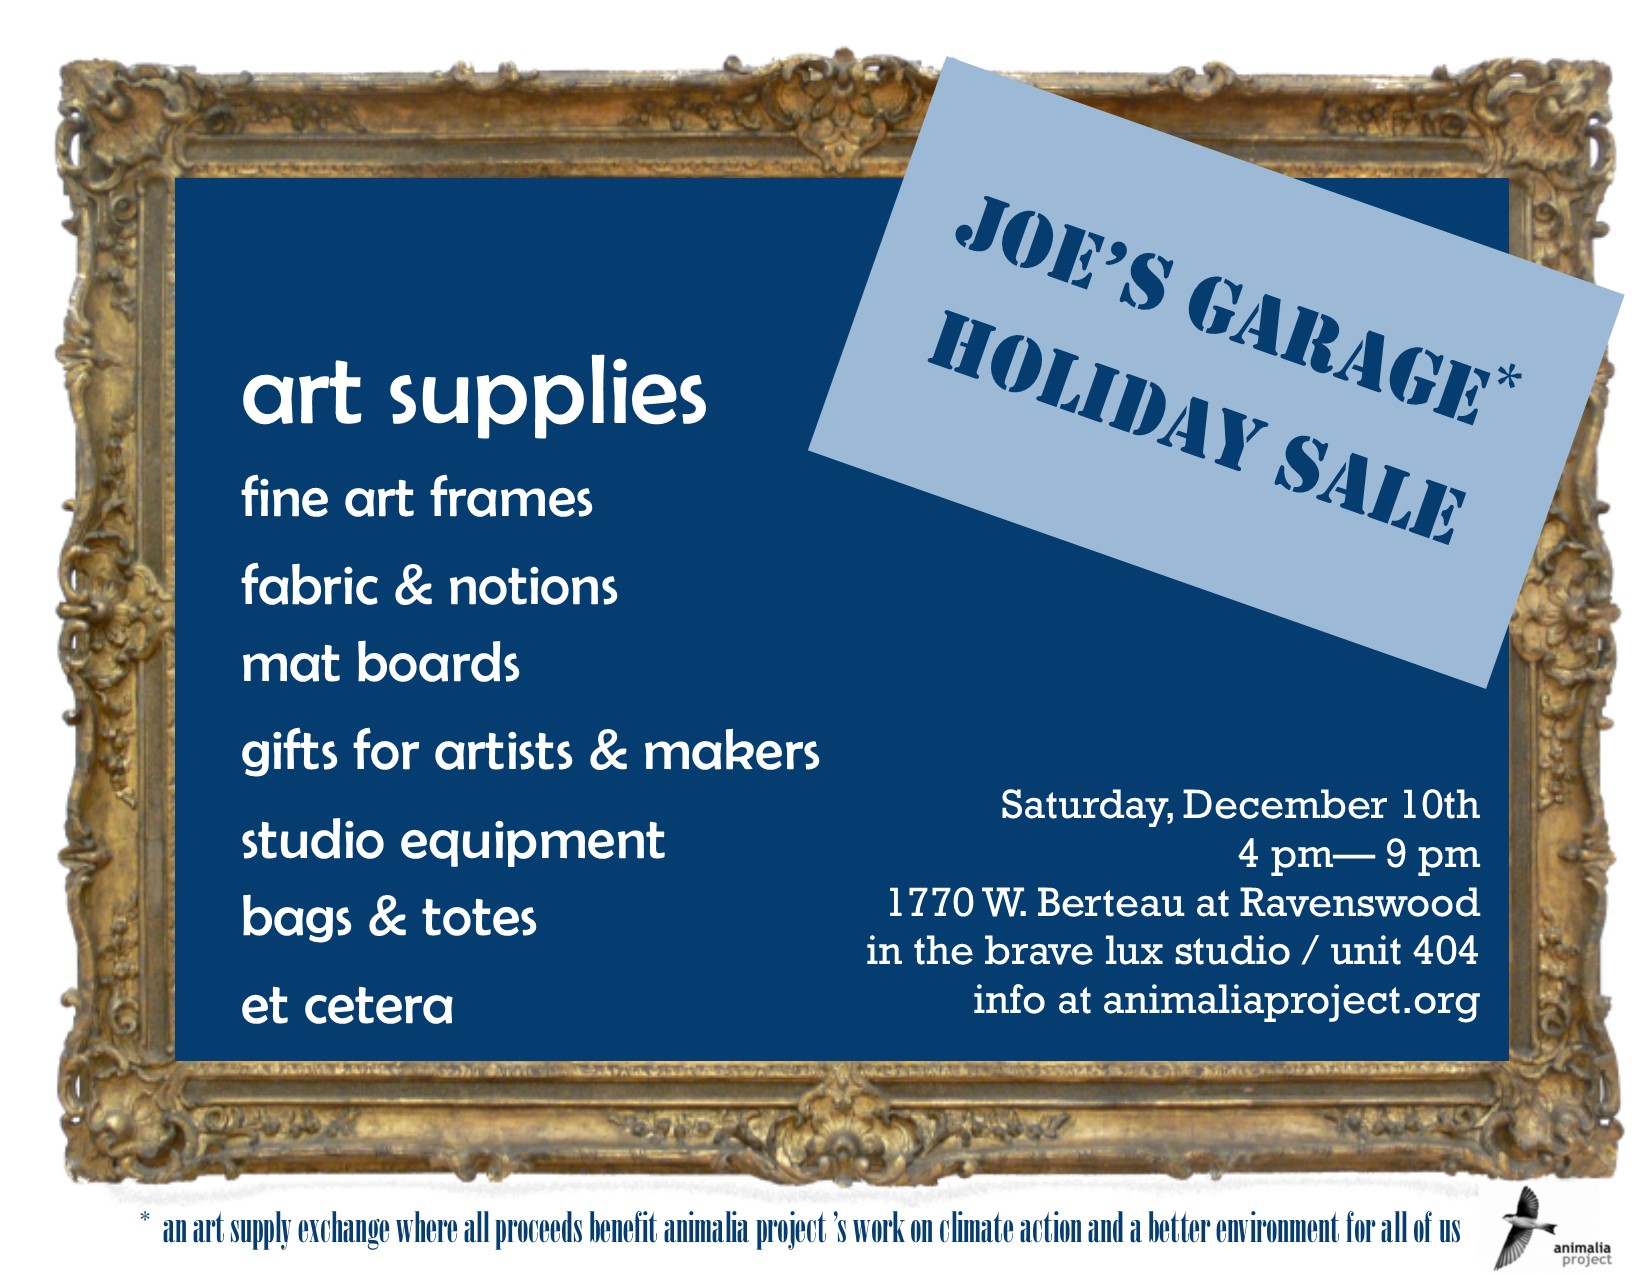 Joe's Garage Holiday Sale 12/10/16 4 pm - 8 pm at 1770 W. Berteau Ave Chicago